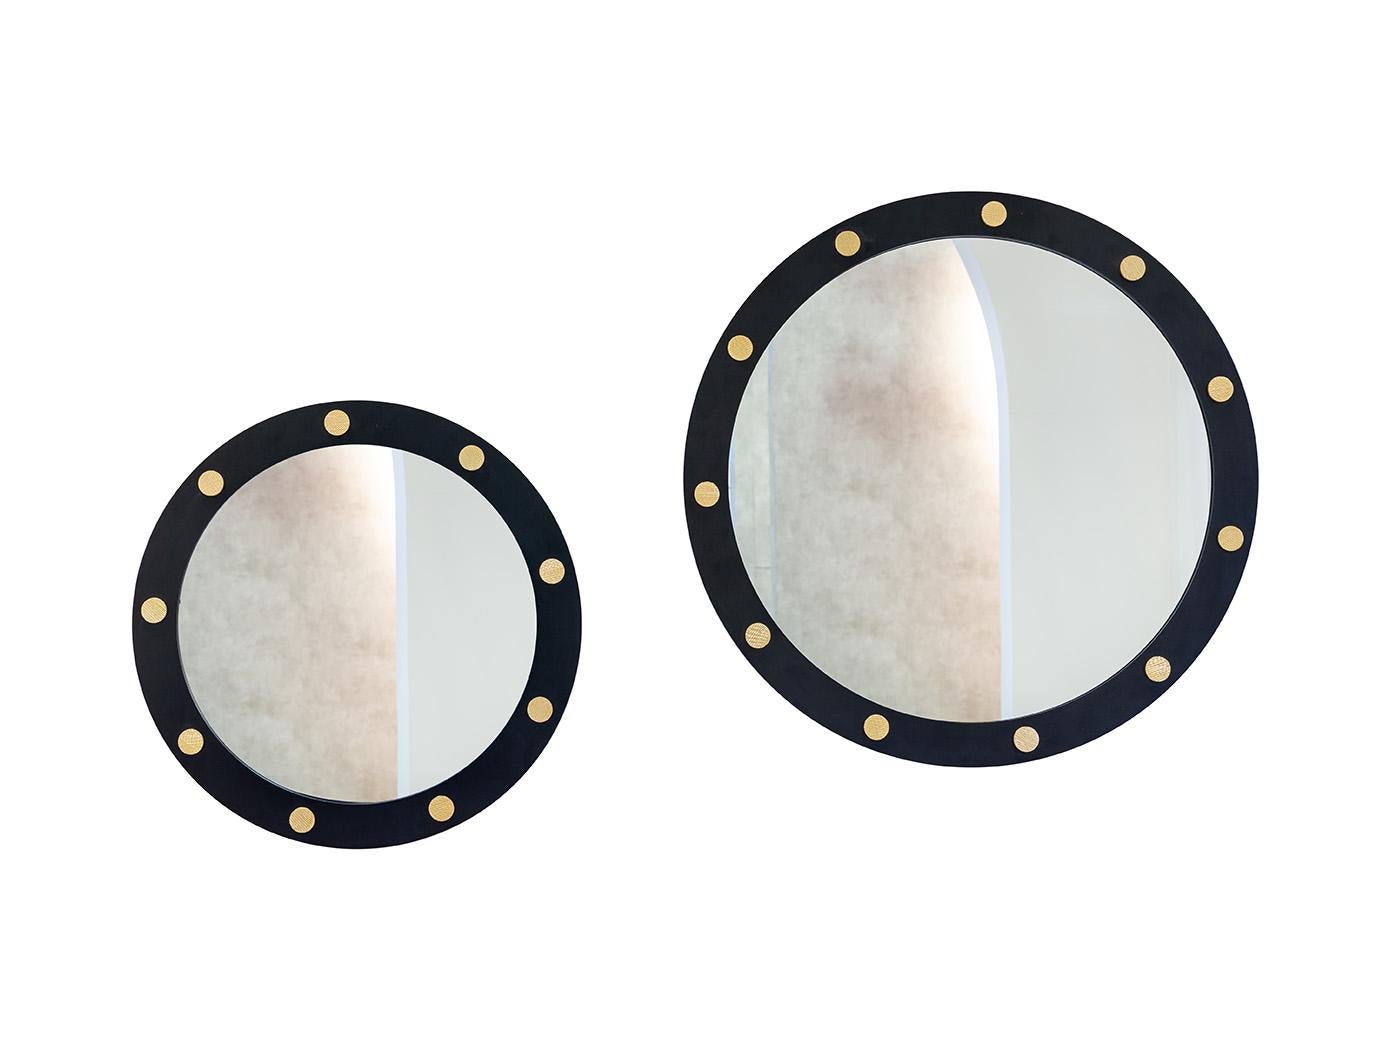 Cluster Round Mirror, in Matt Black Lacquered Iron, Handcrafted in Portugal by Duistt

Cluster round mirror, crafted with great attention to details, features a matt black lacquered iron structure with carved brass details that will standout in any